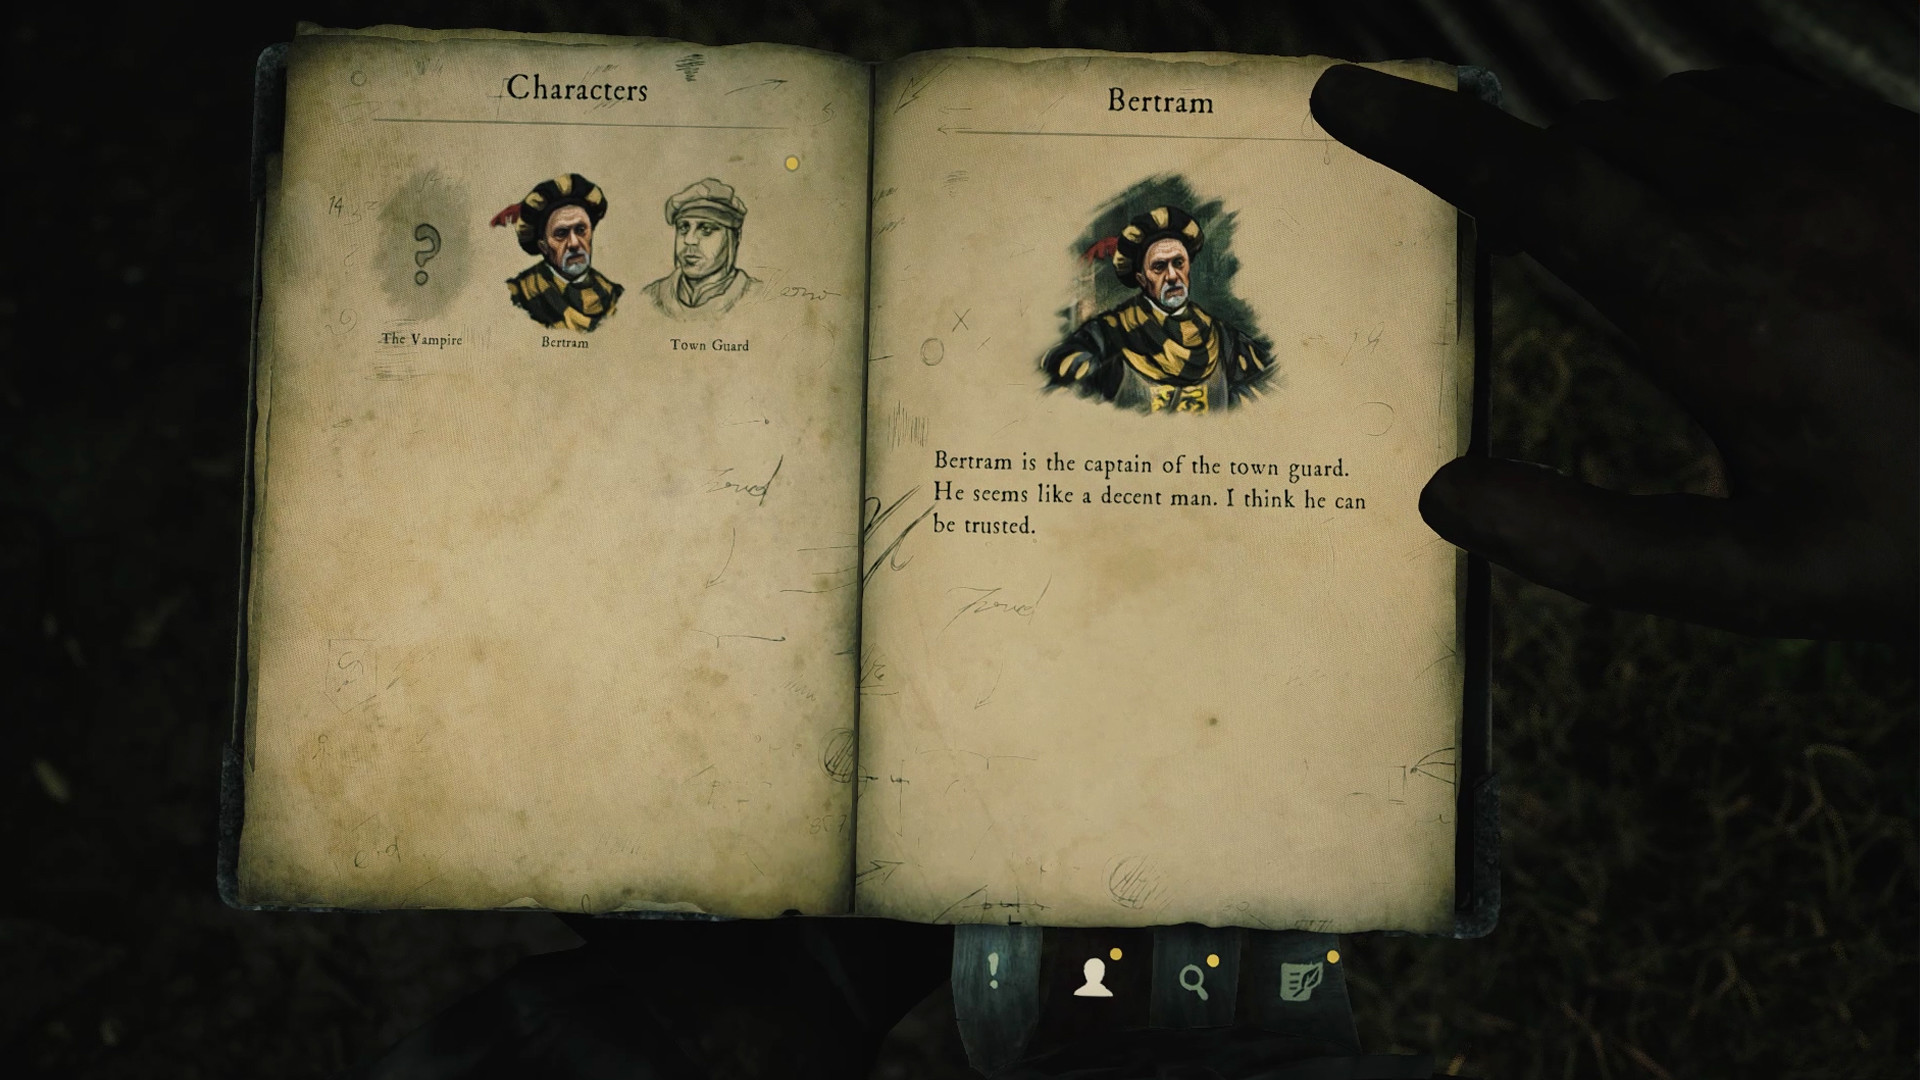 PoV of inquisitor's notebook detailing various personages around the town.